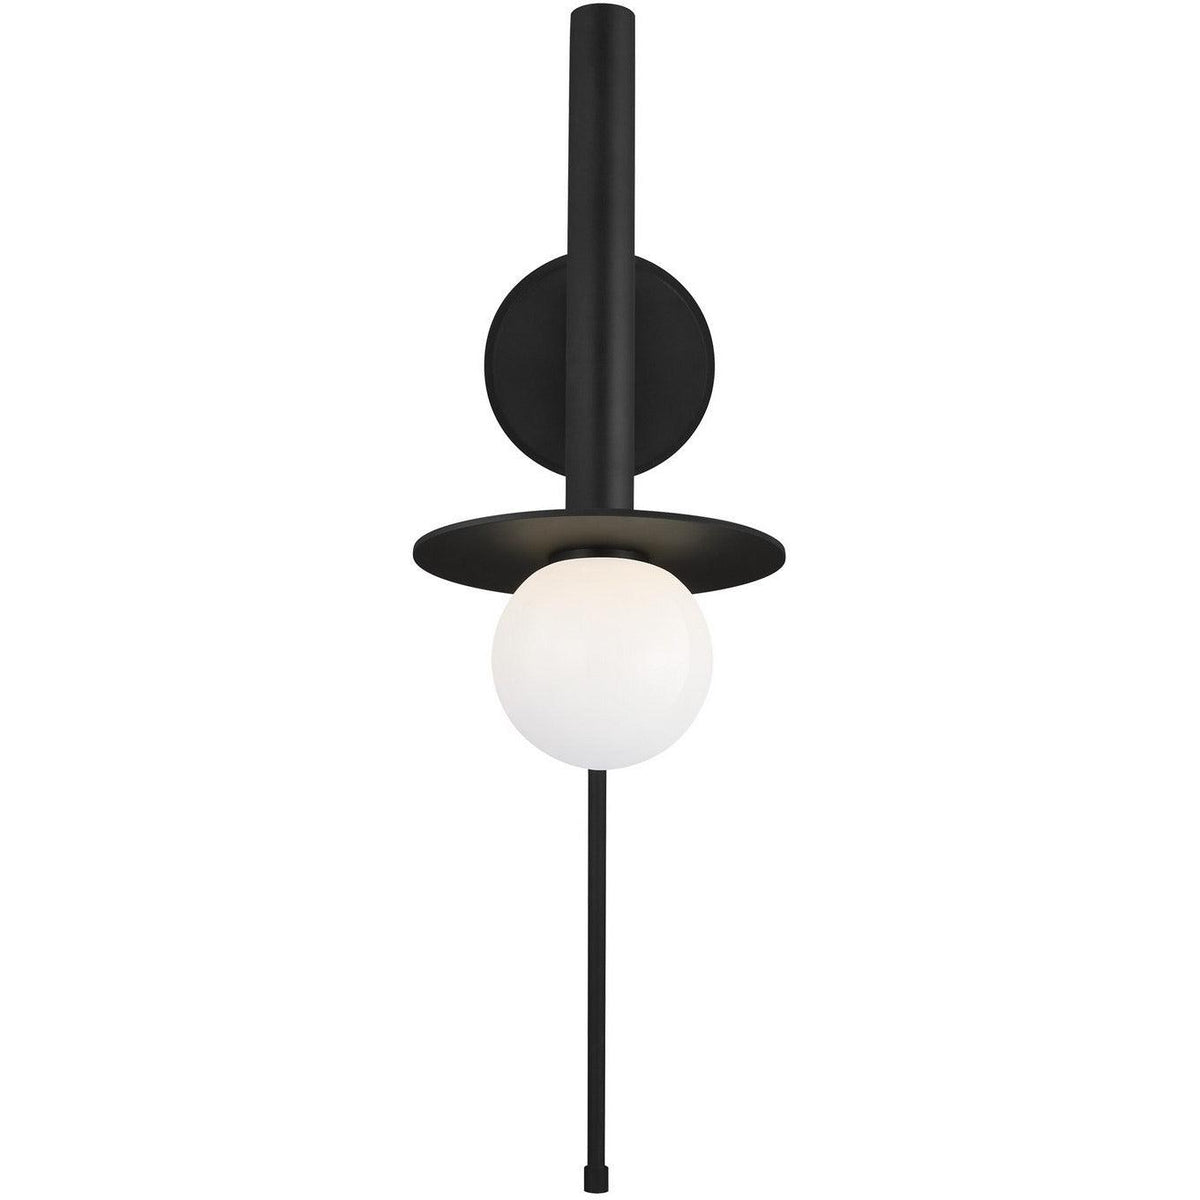 Visual Comfort Studio Collection - Nodes Pivot Wall Sconce - KW1021MBK | Montreal Lighting & Hardware